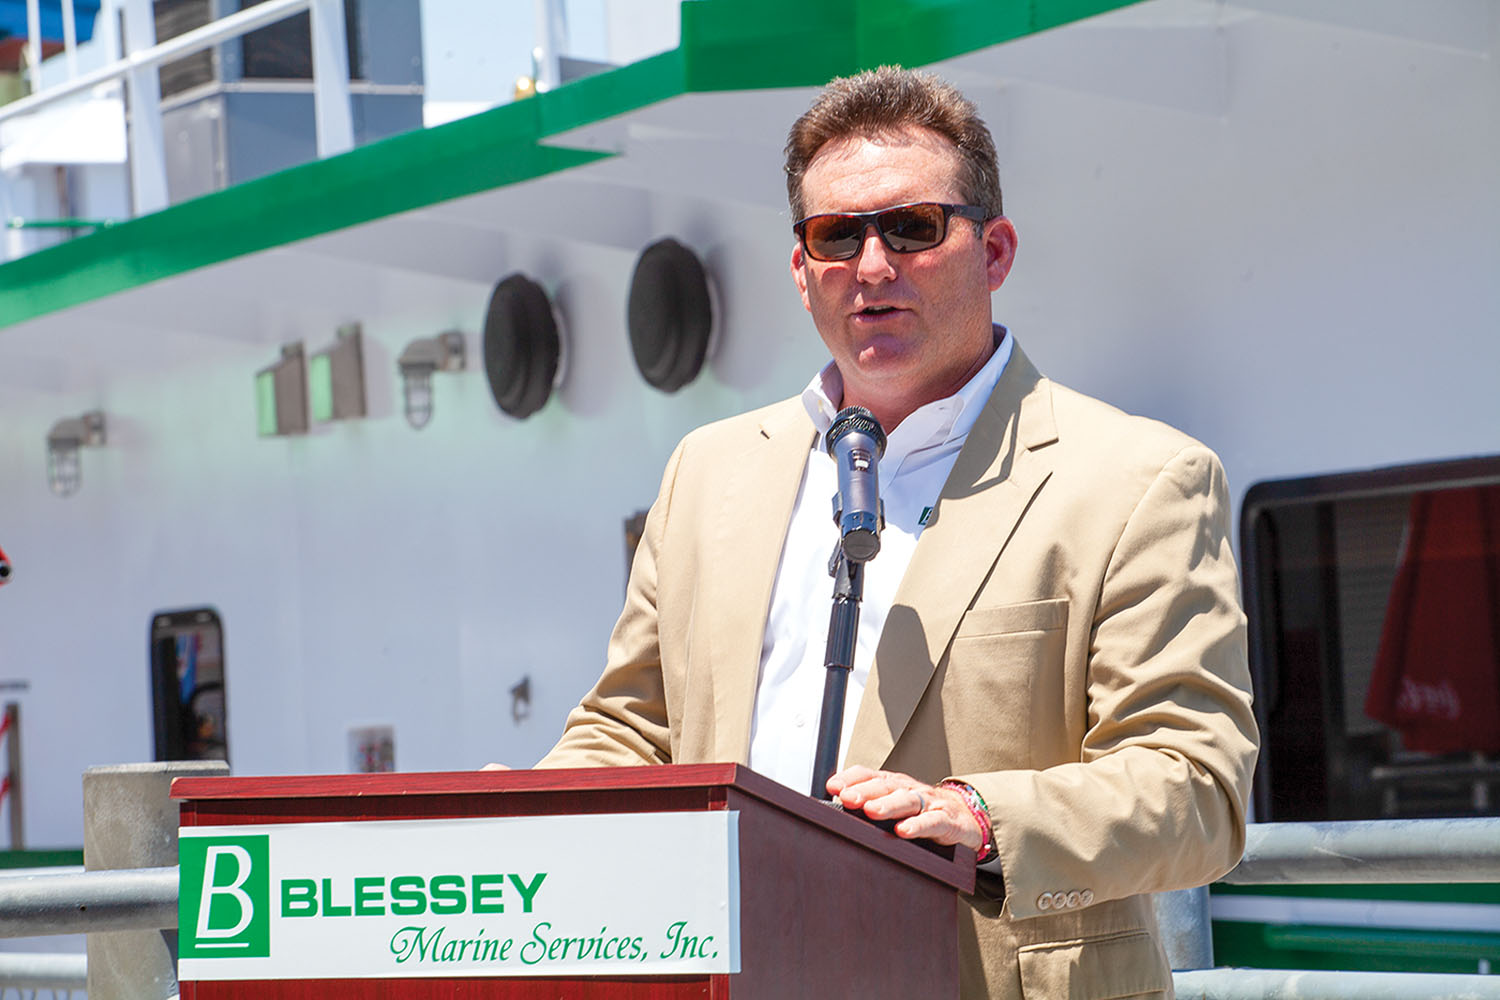 Clark Todd, president and CEO of Blessey Marine Services, was elected chairman of The American Waterways Operators in May 2022. (WJ file photo by Frank McCormack)